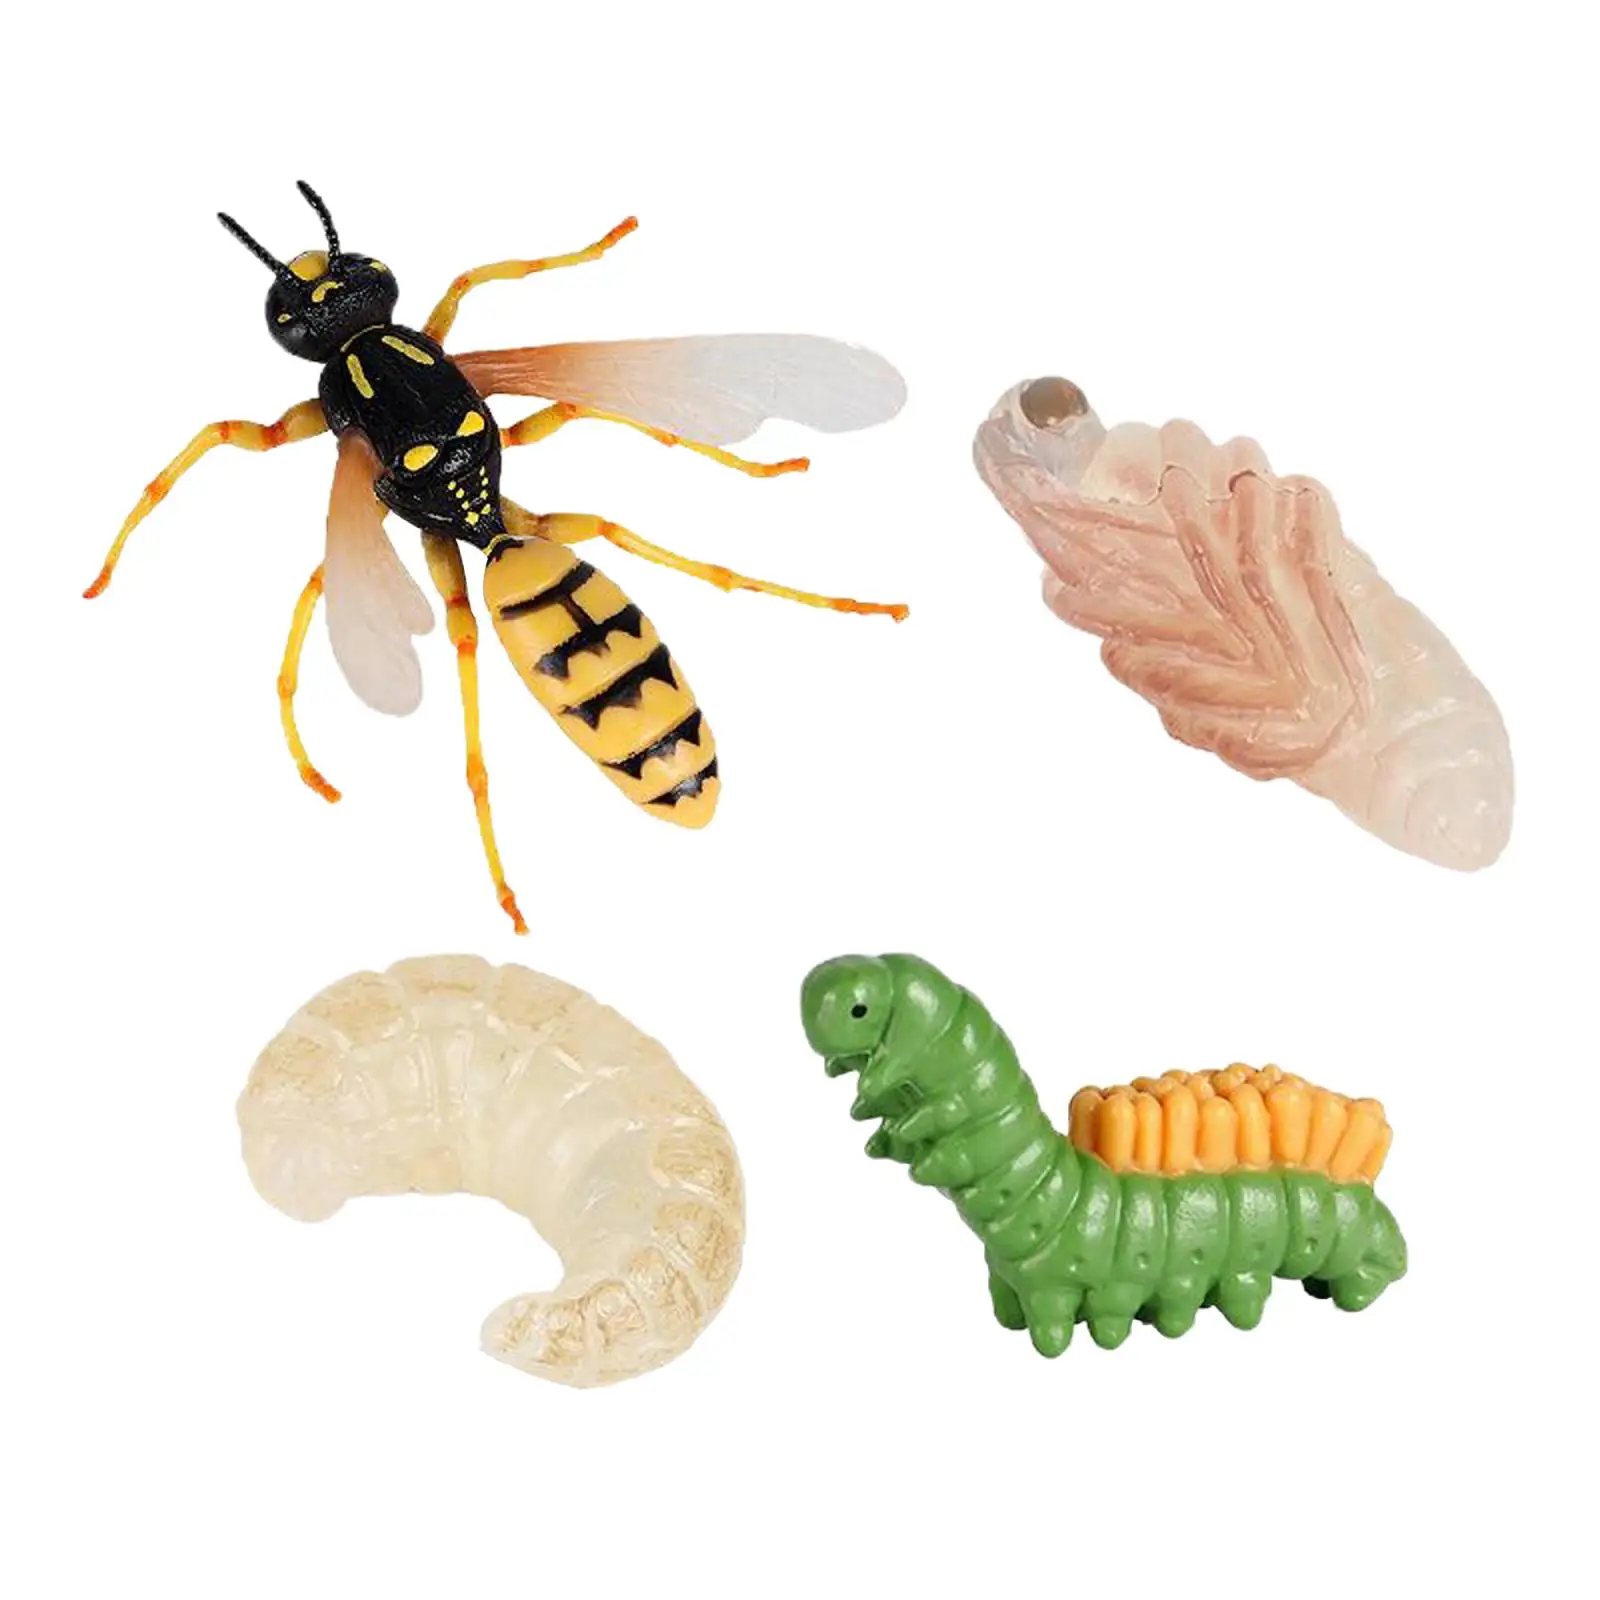 Meticulously Designed Wasp Lifecycle Figures Educational Accessory to Our